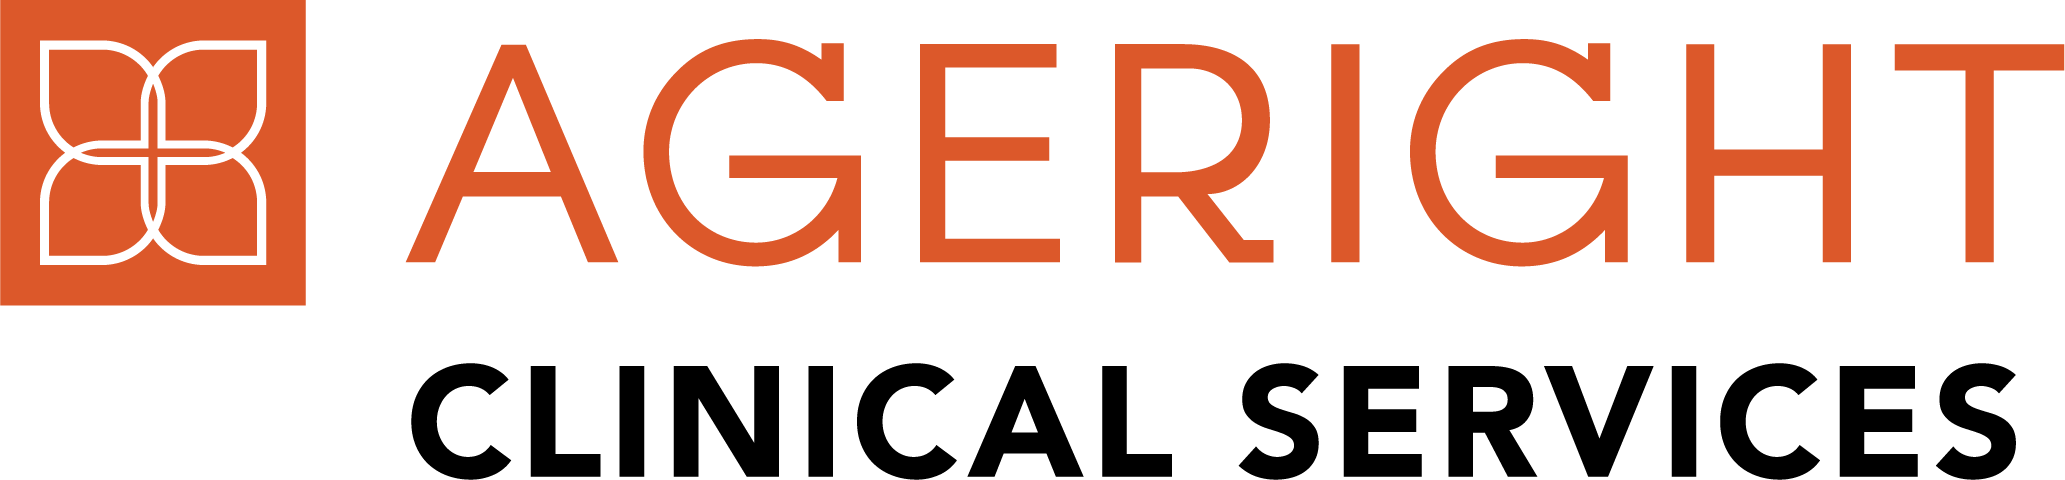 AgeRight Clinical Services logo